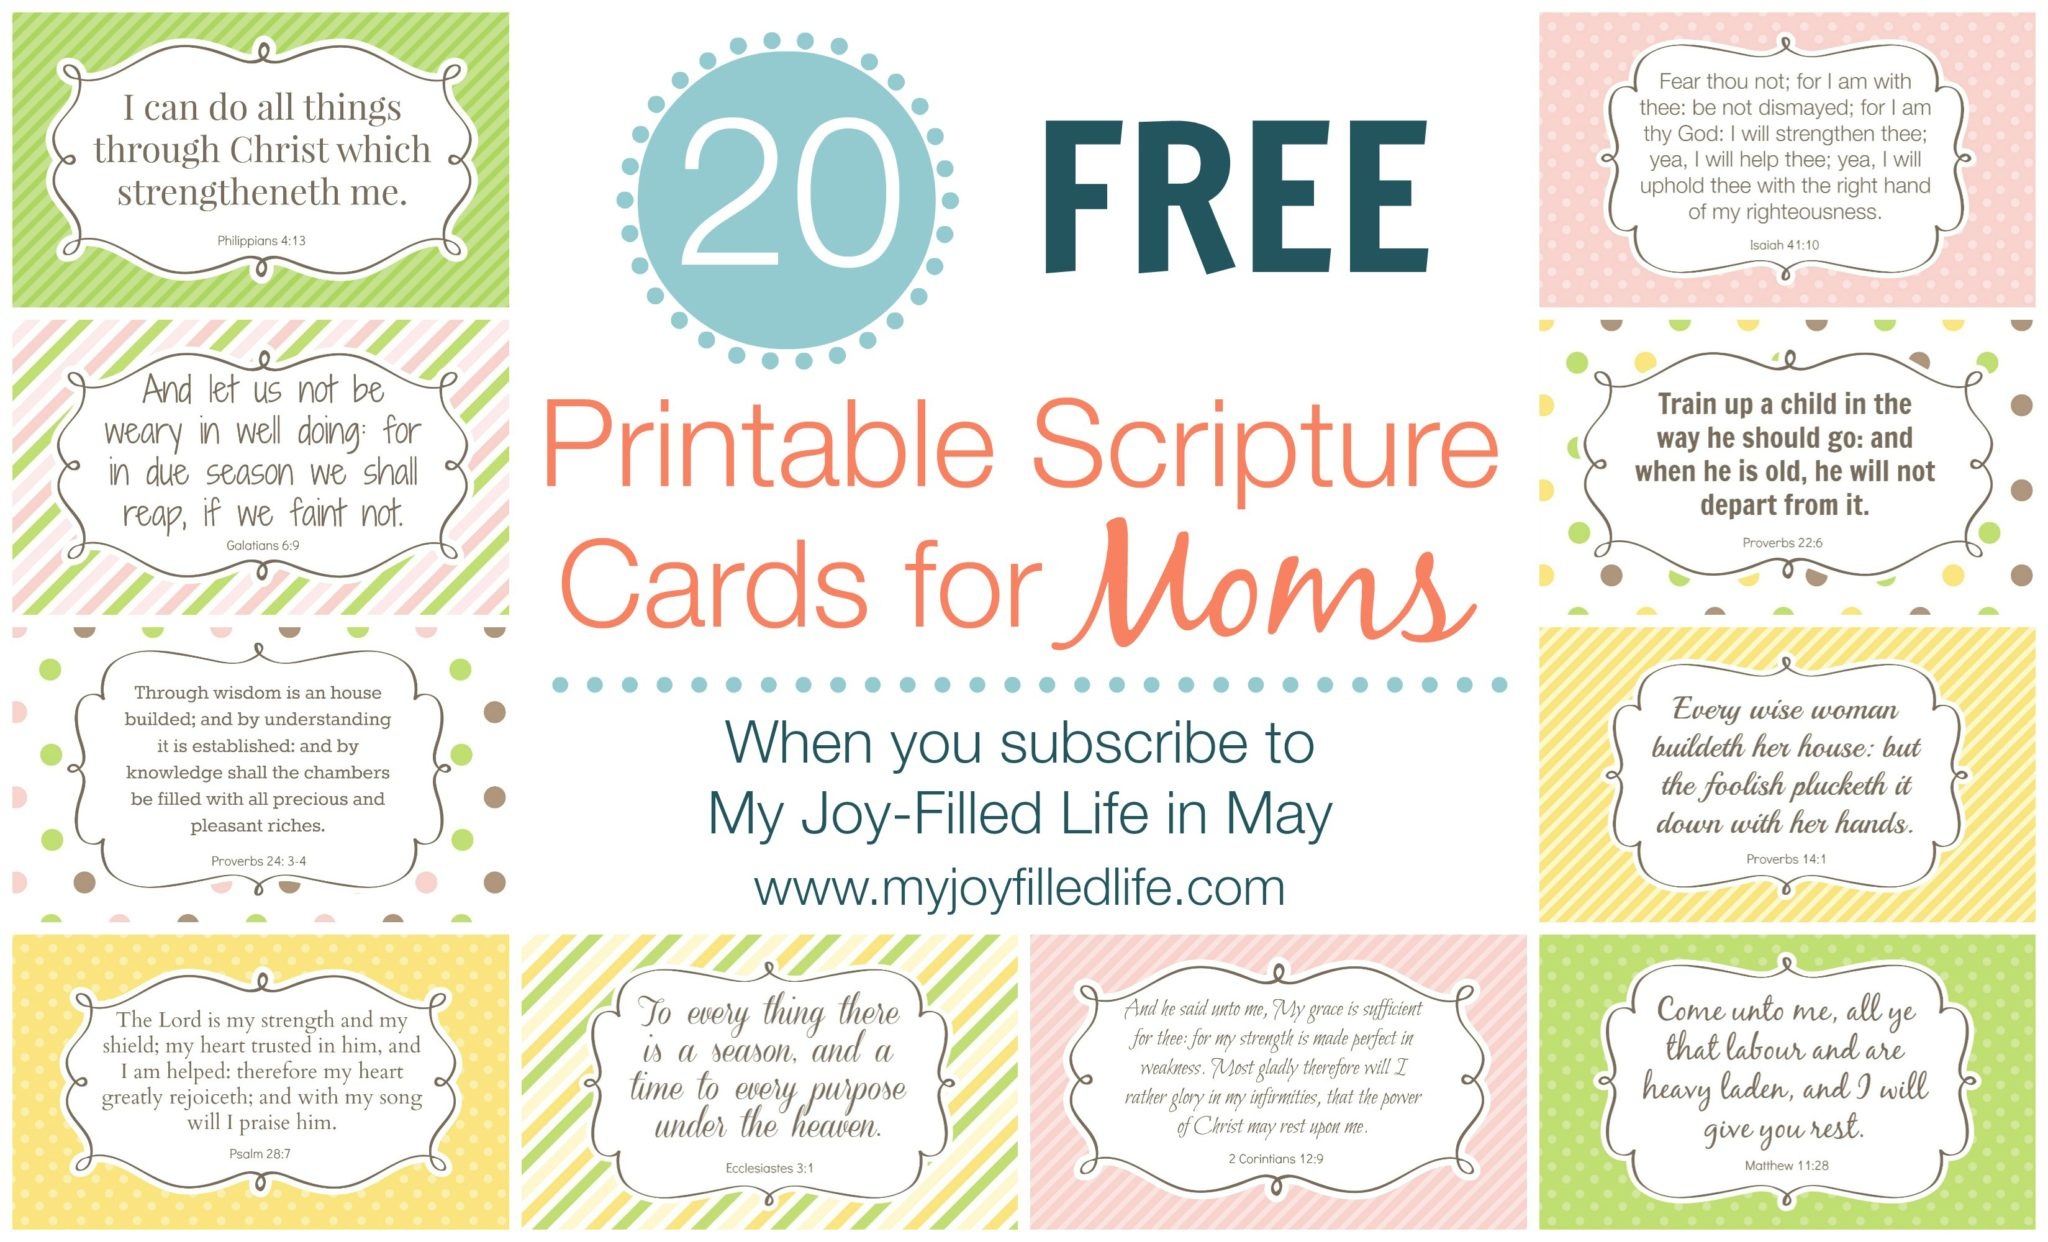 Printable Scripture Cards For Moms - Free For Subscribers - My Joy - Free Printable Scripture Cards